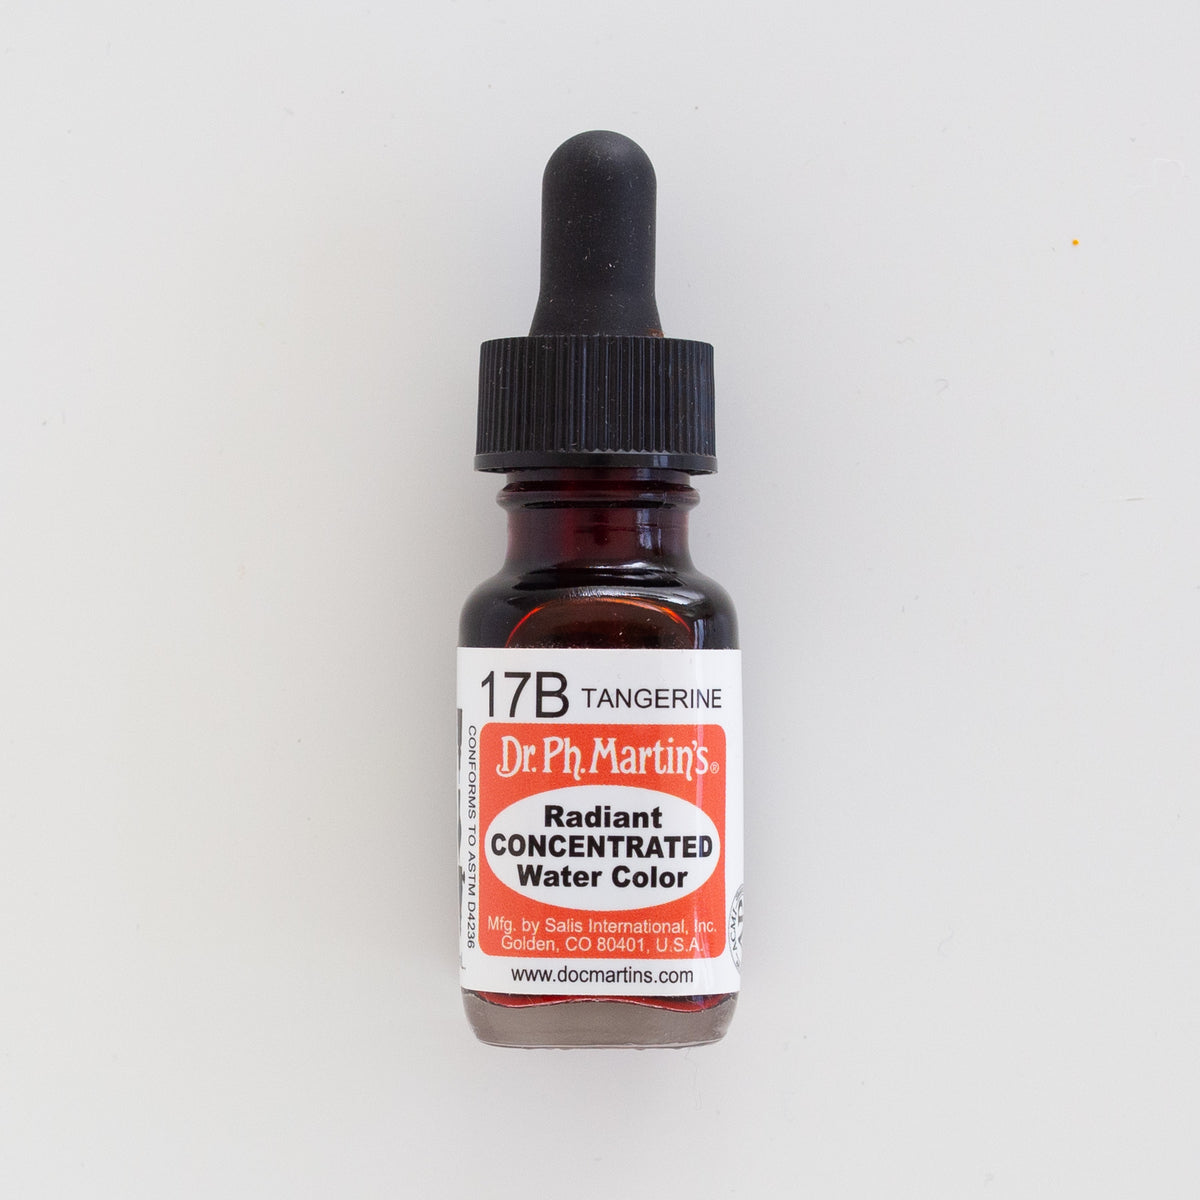 DR. Ph. Martin's Radiant Concentrated 17B Tangerine